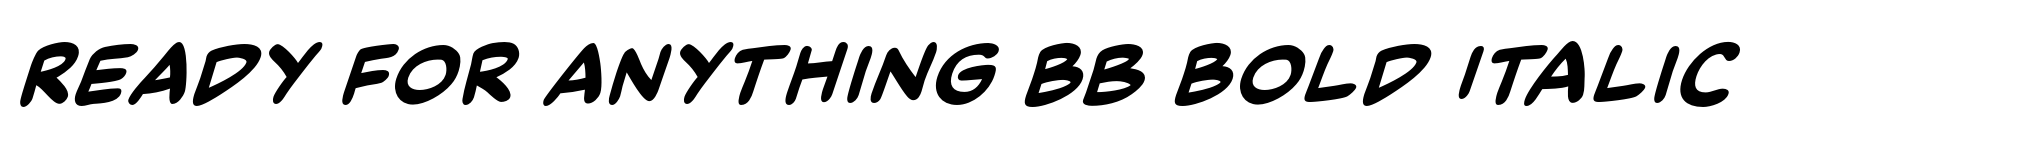 Ready For Anything BB Bold Italic image